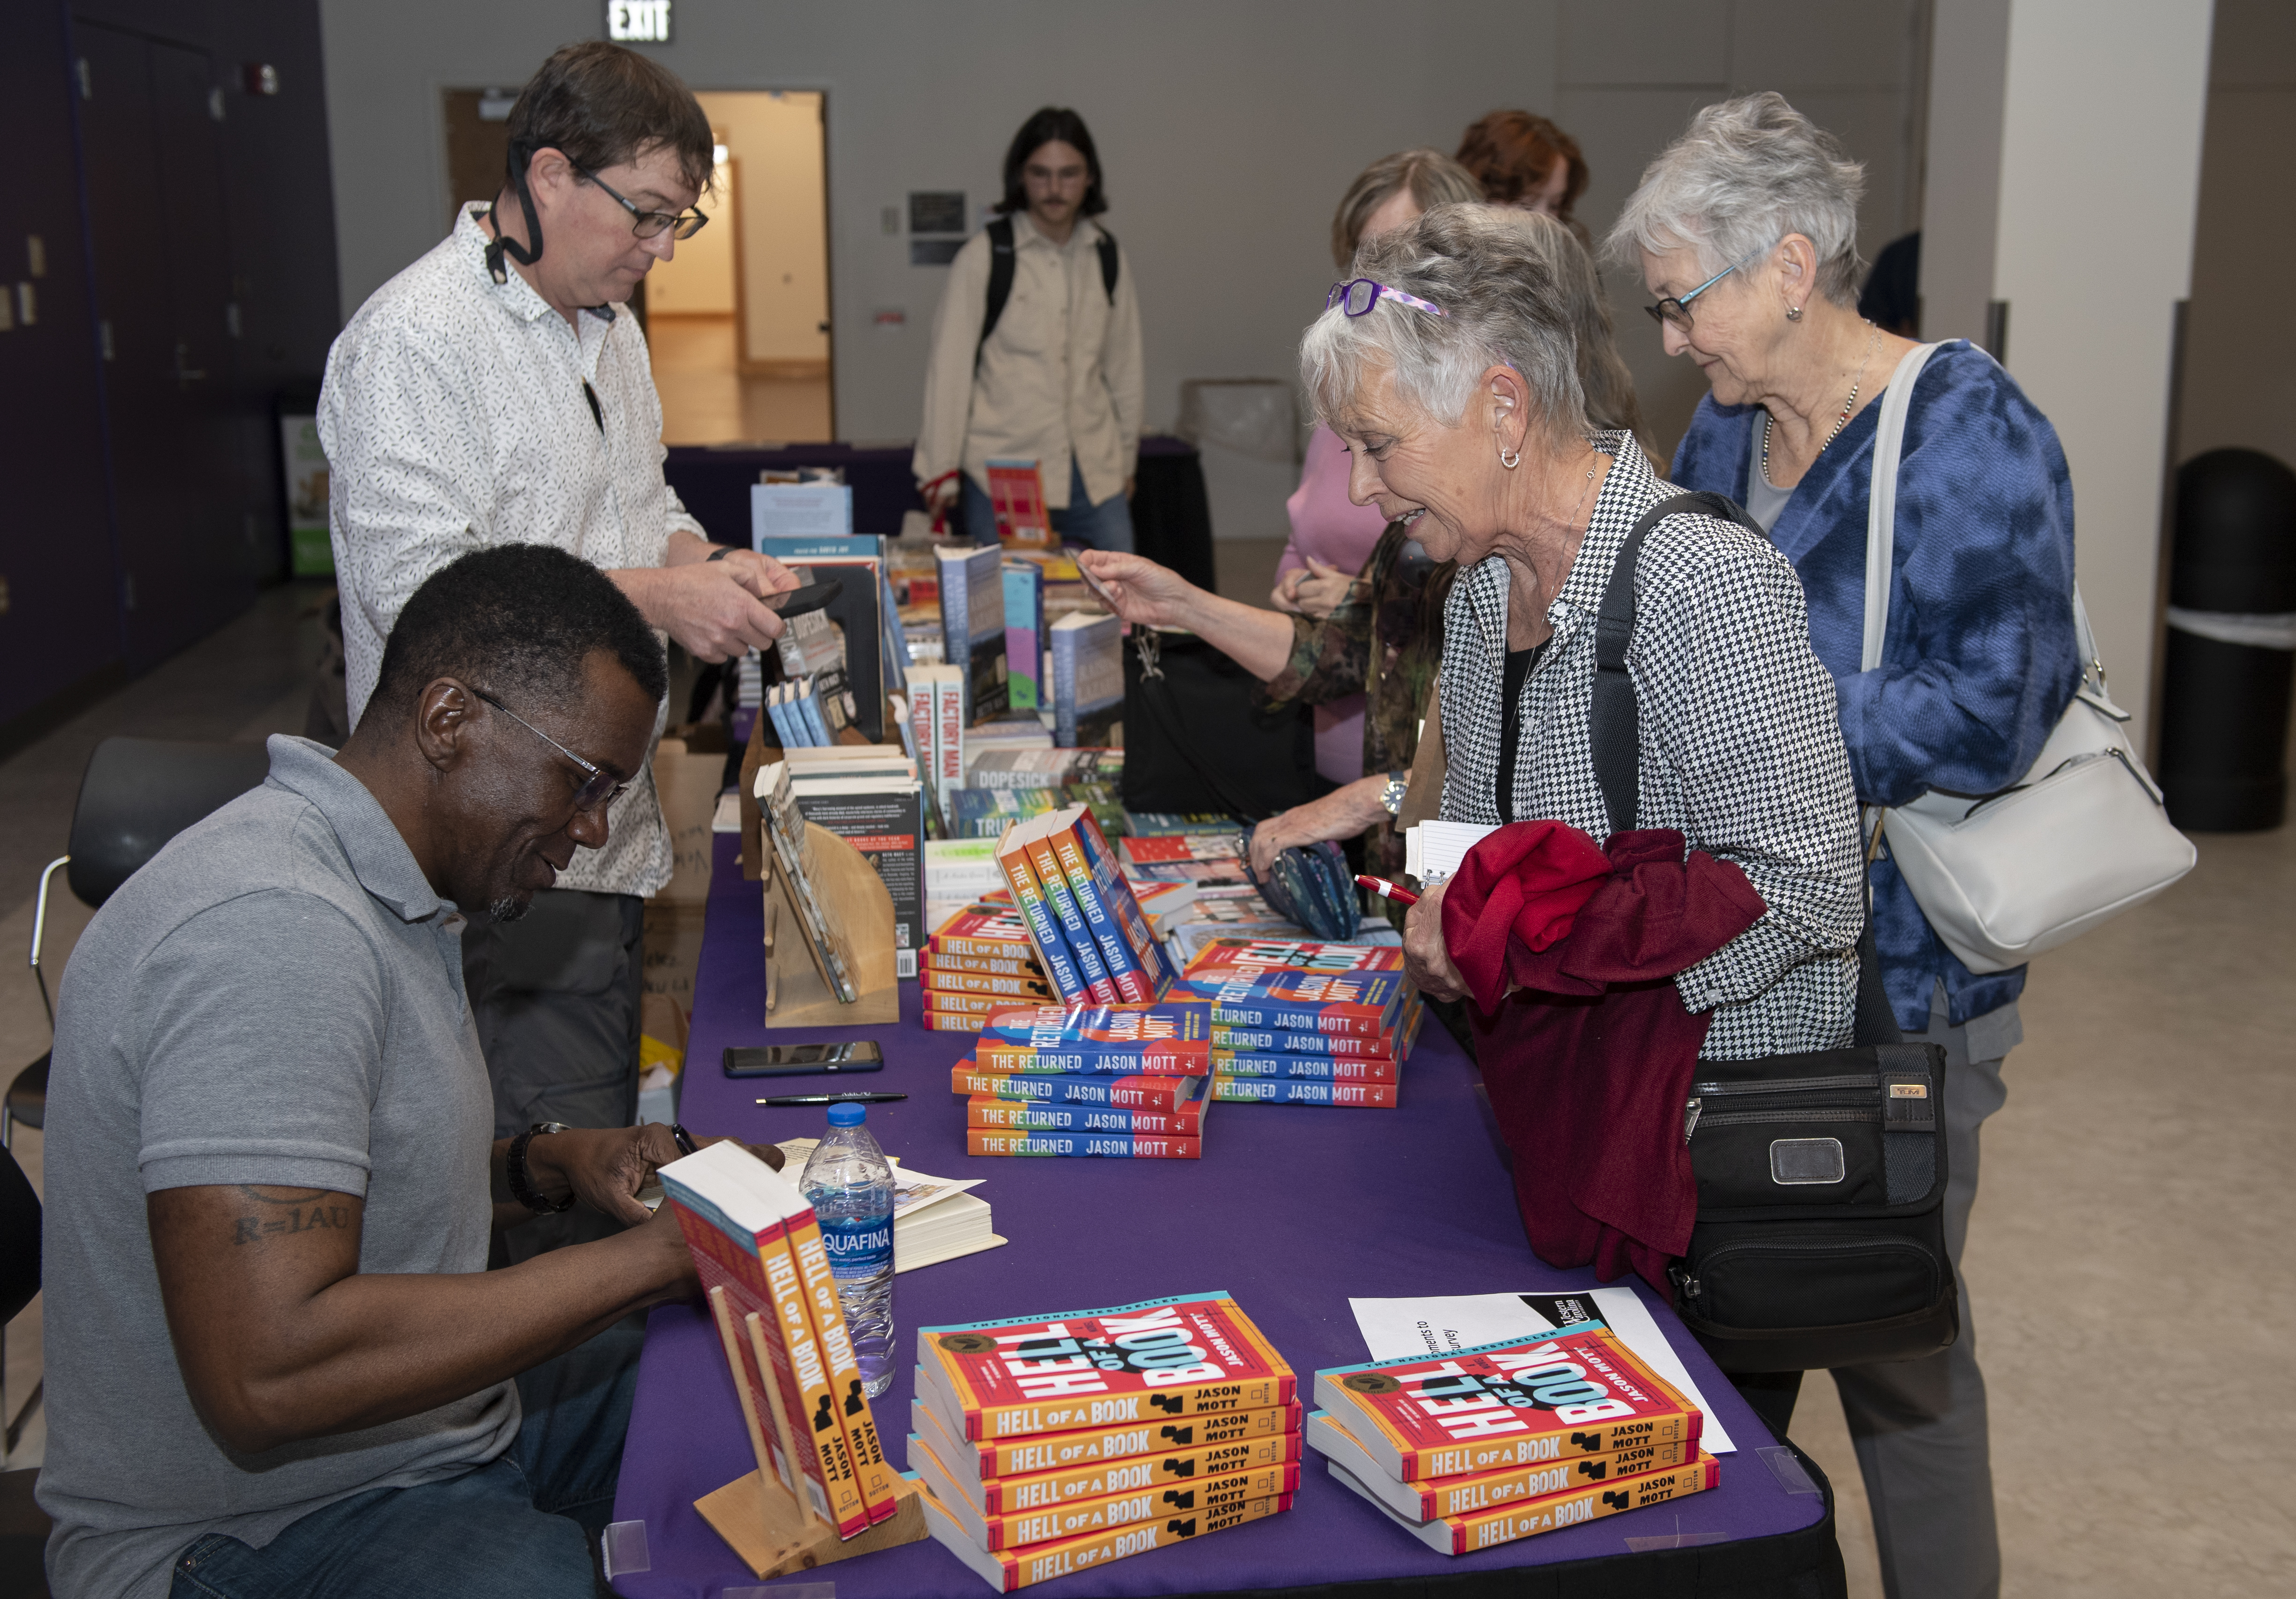 Jason Mott signing copies of his novel Hell of a Book